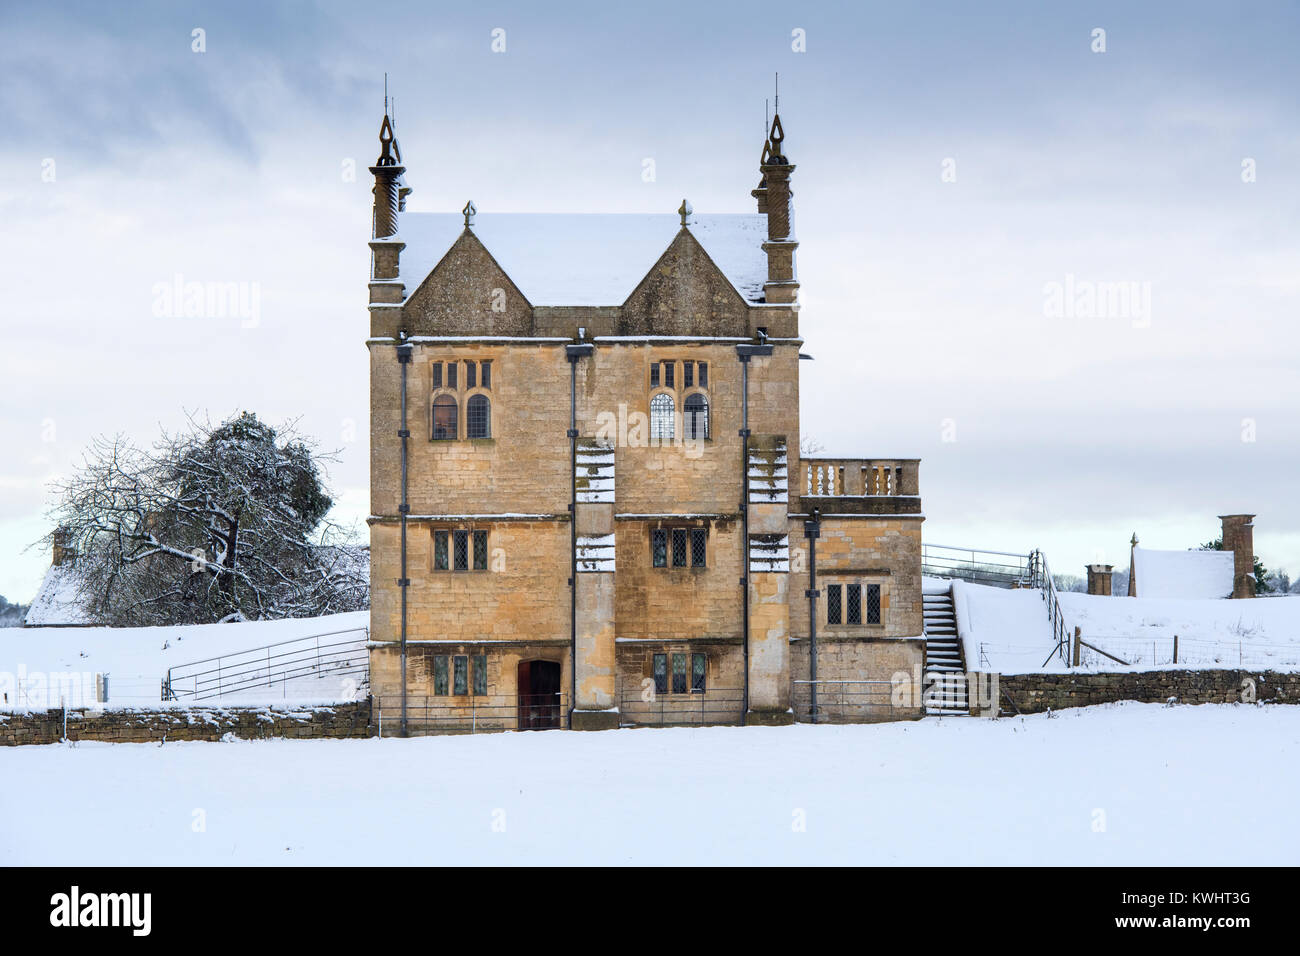 East Banqueting House in the snow in December. Chipping Campden, Cotswolds, Gloucestershire, England Stock Photo